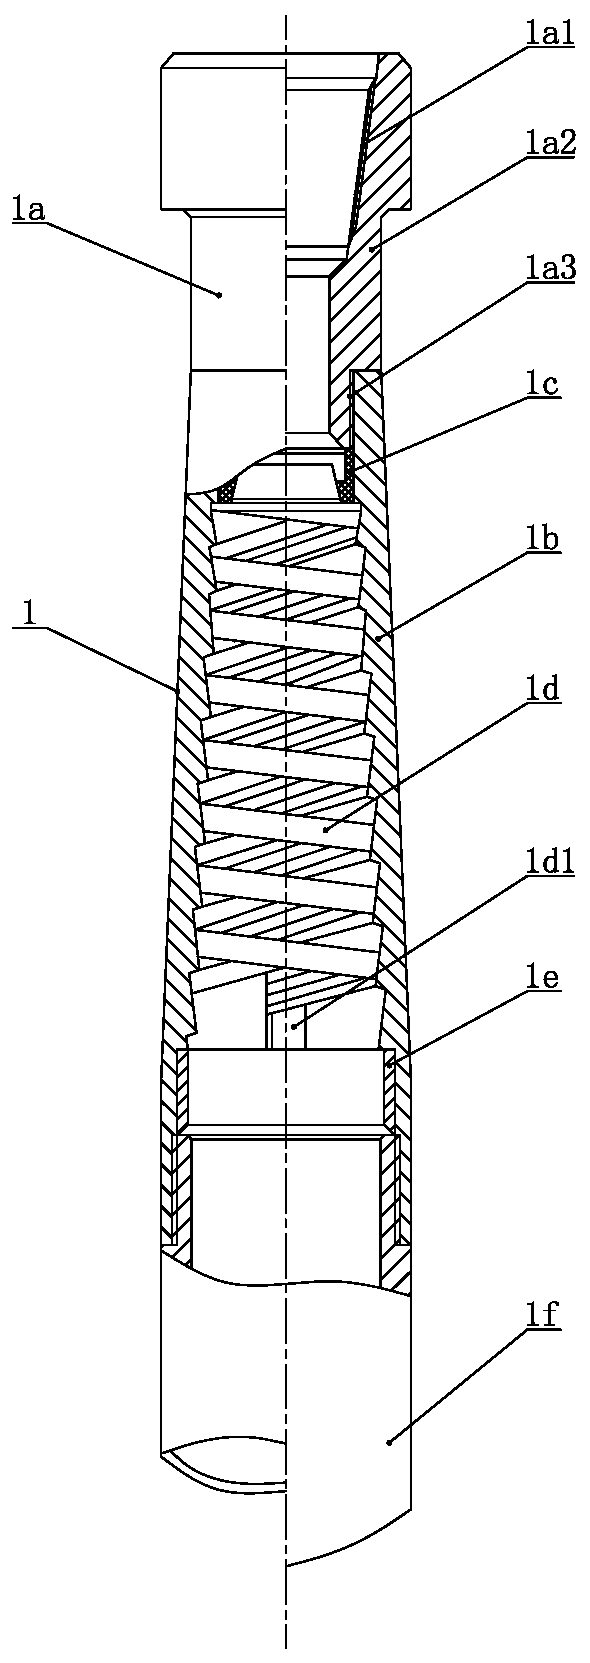 Method for replacing producing well shaft casing pipe